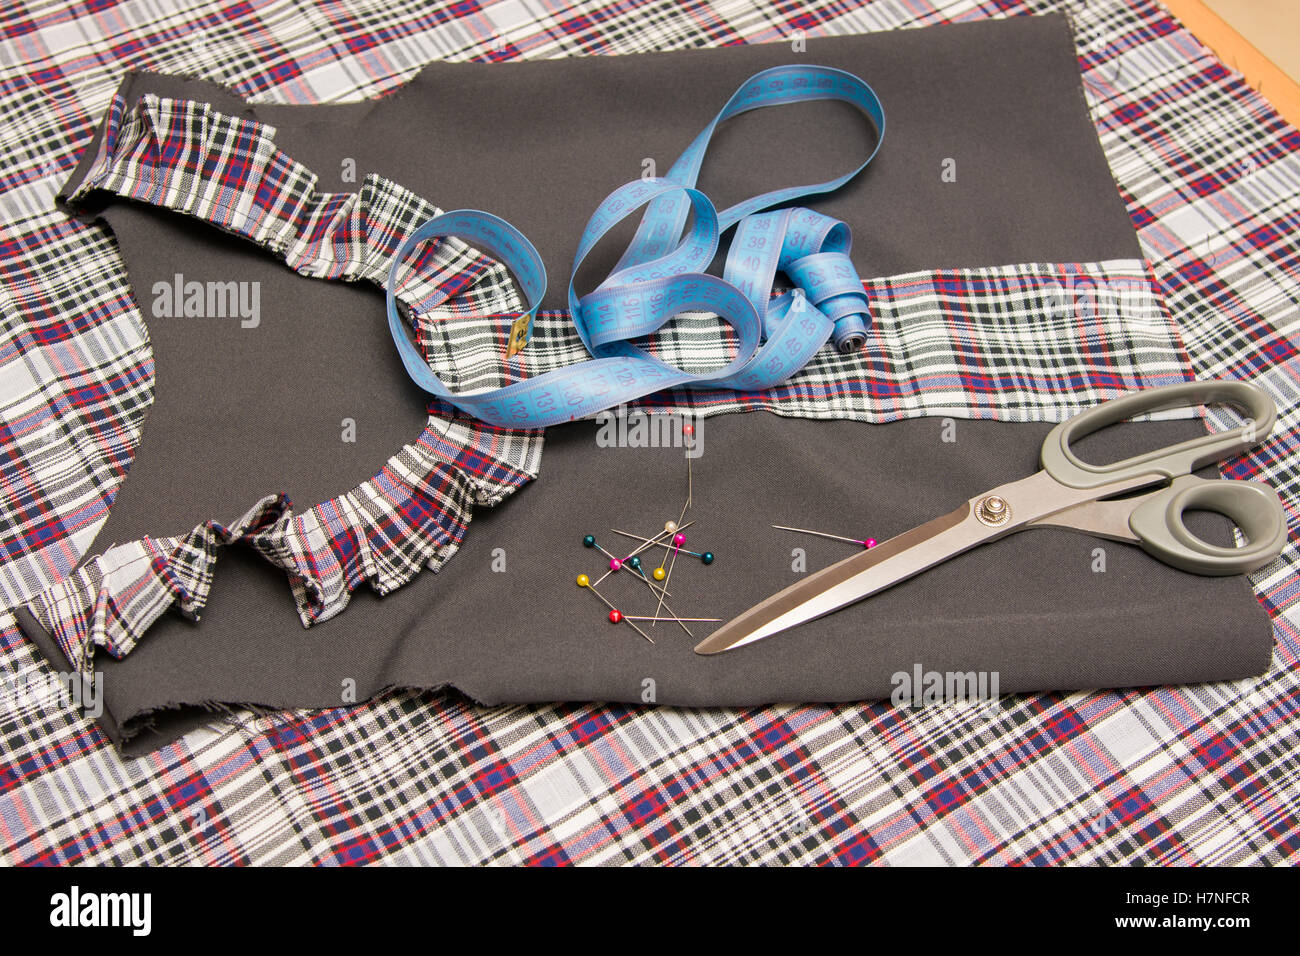 Top view of the child billet school dress lying on the table with sewing accessories Stock Photo